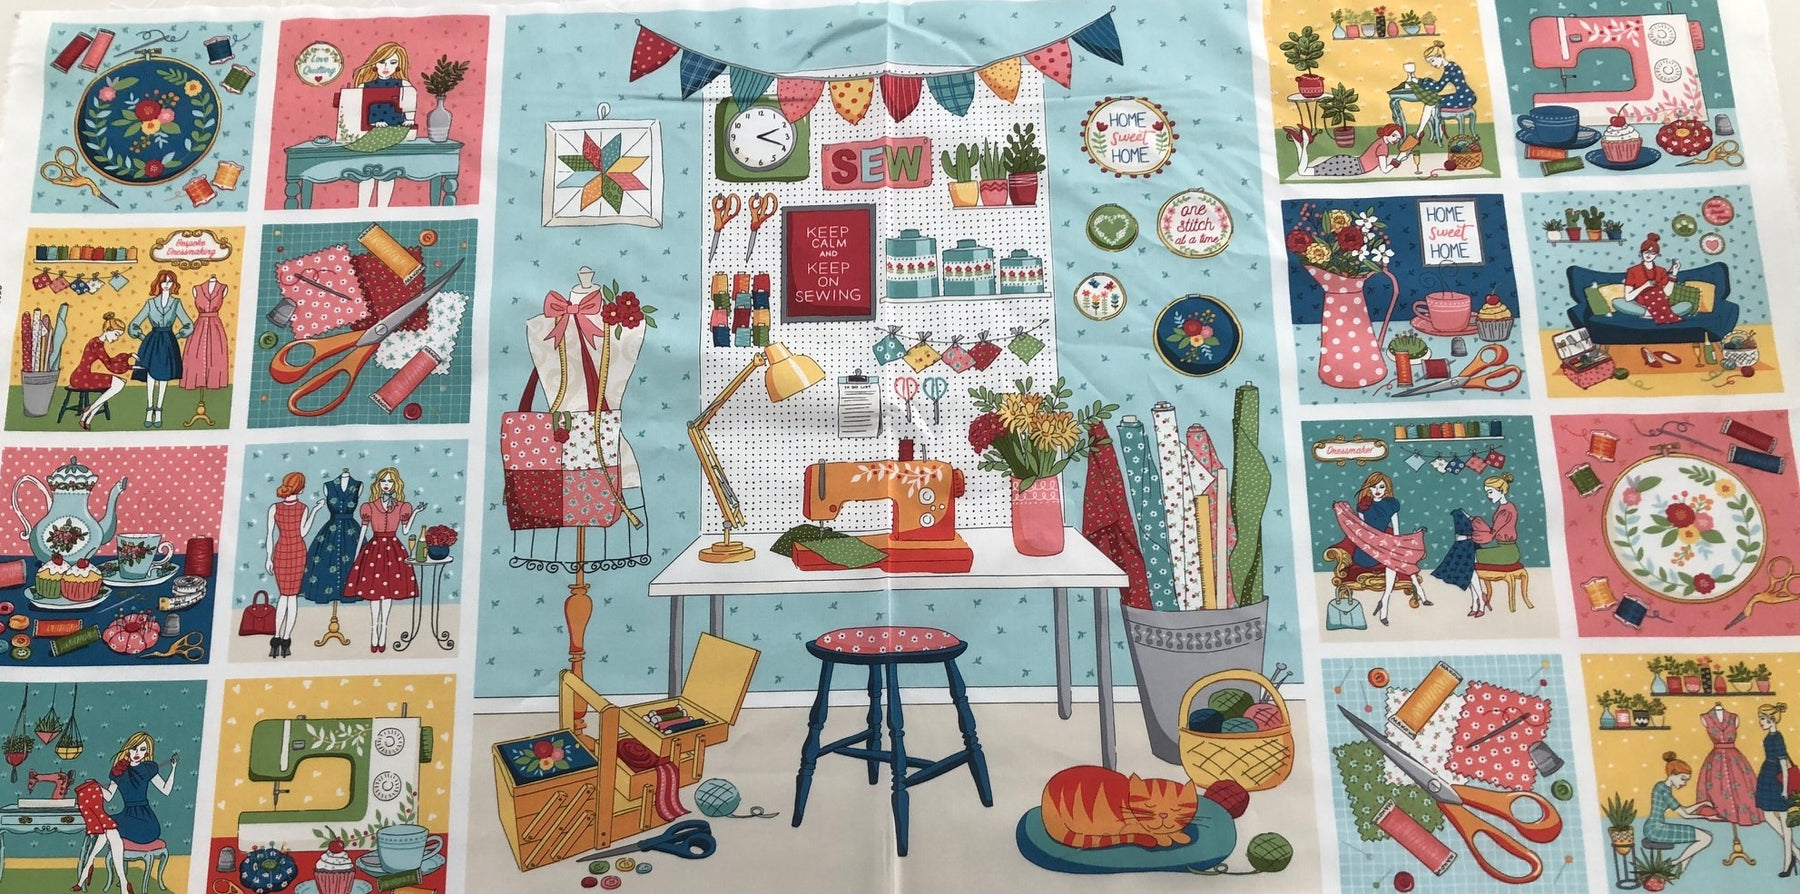 Sewing Room Panel by Makower